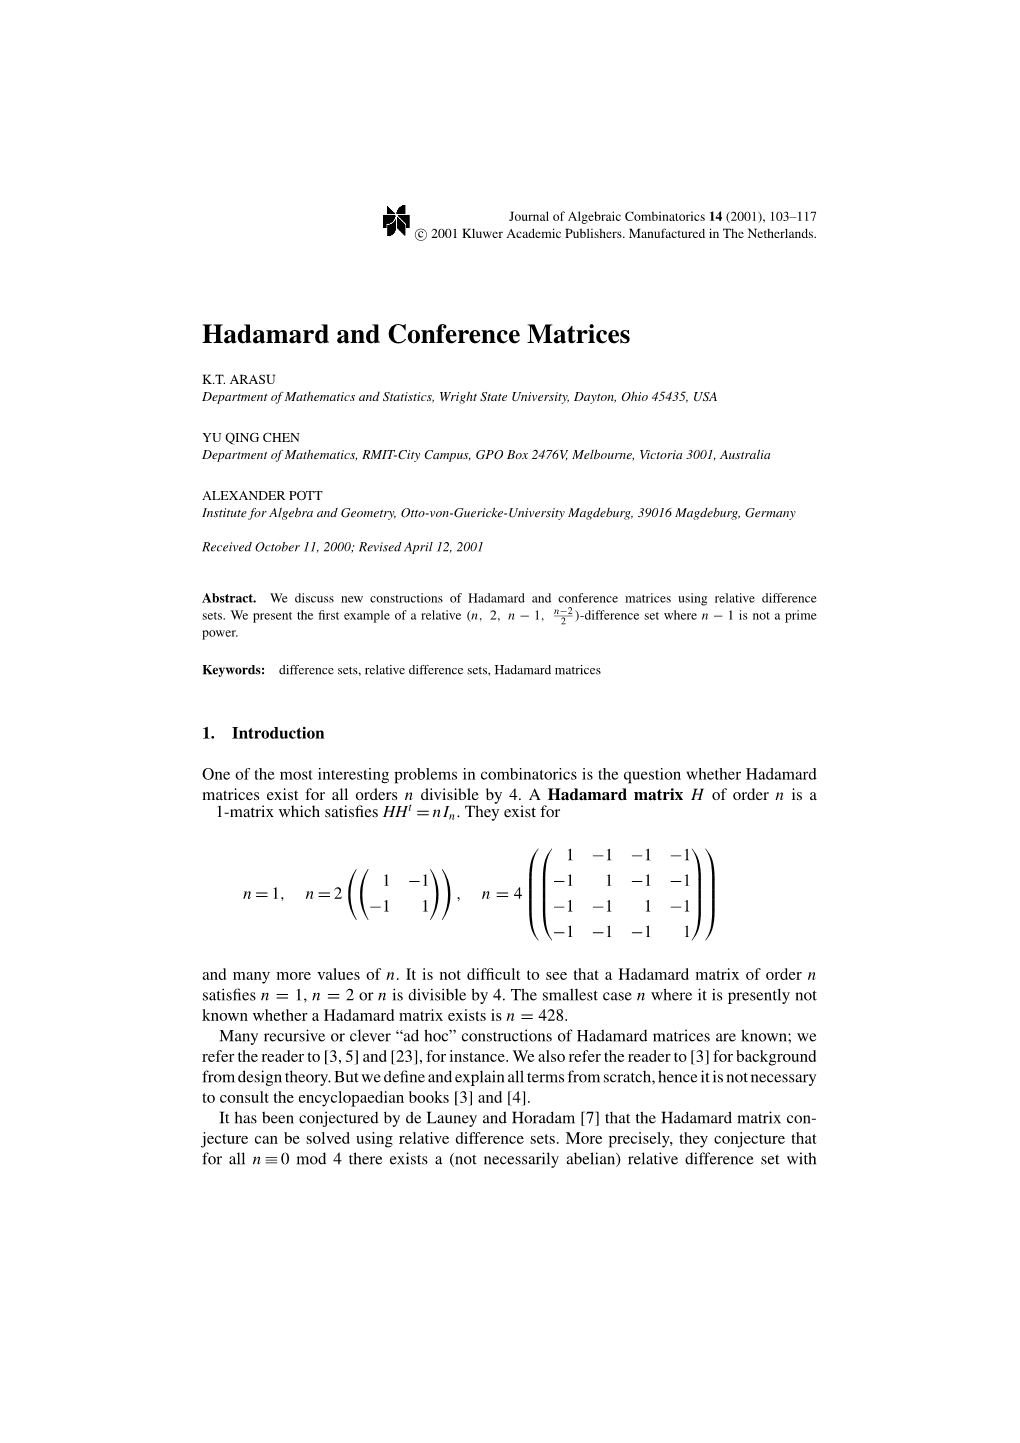 Hadamard and Conference Matrices